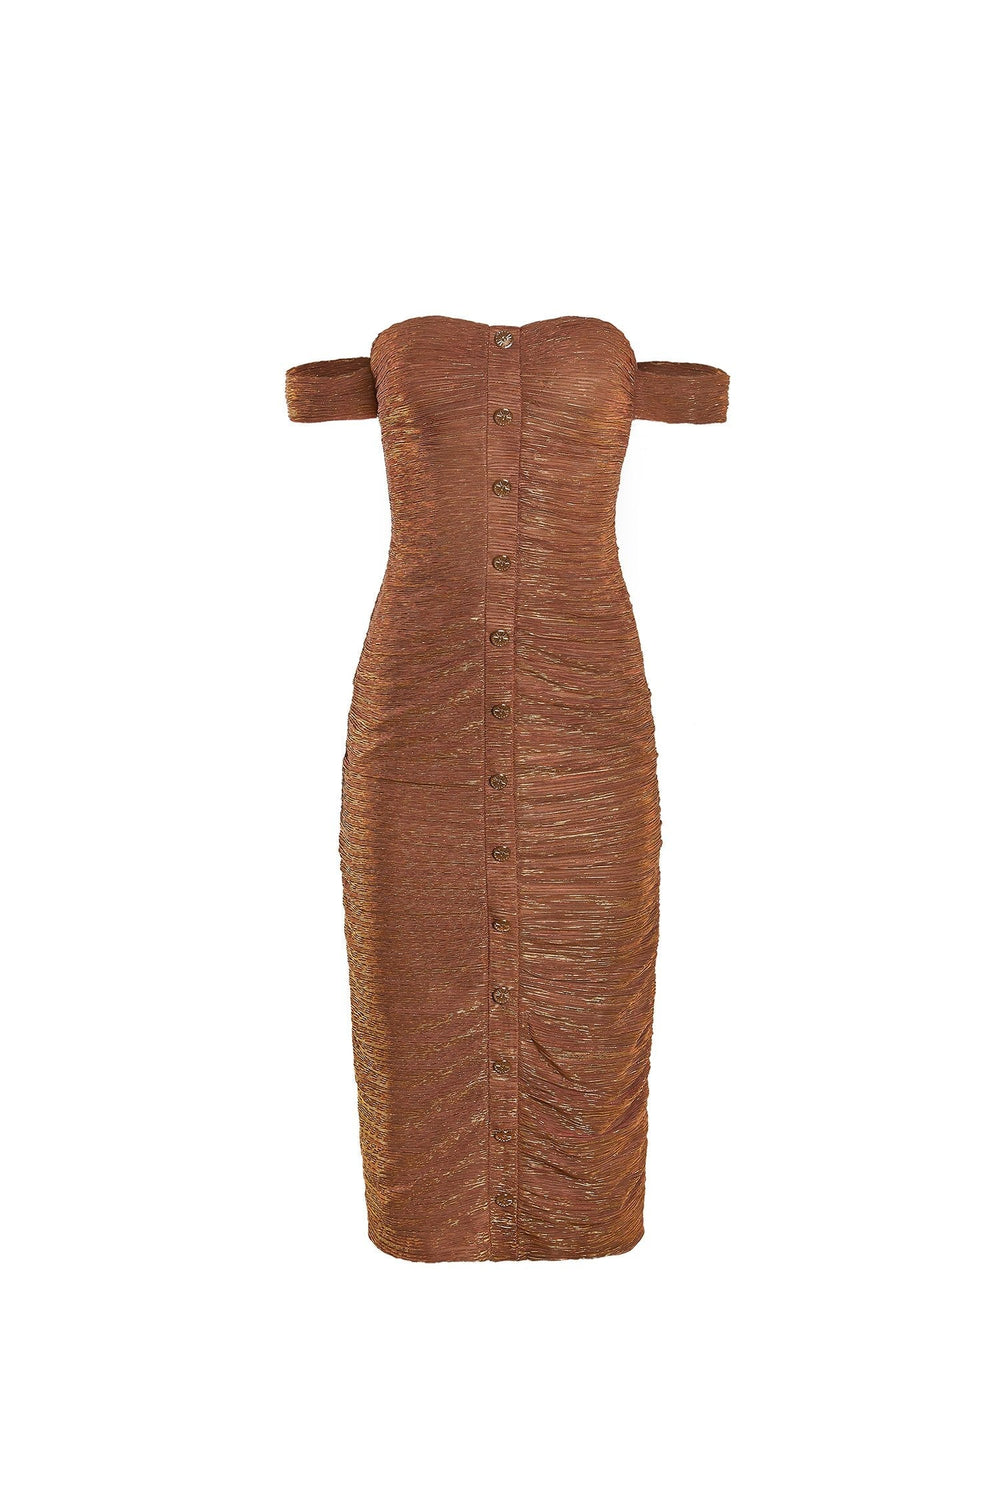 Edaline Iridescent Rust Midi with Off-Shoulder Sleeves